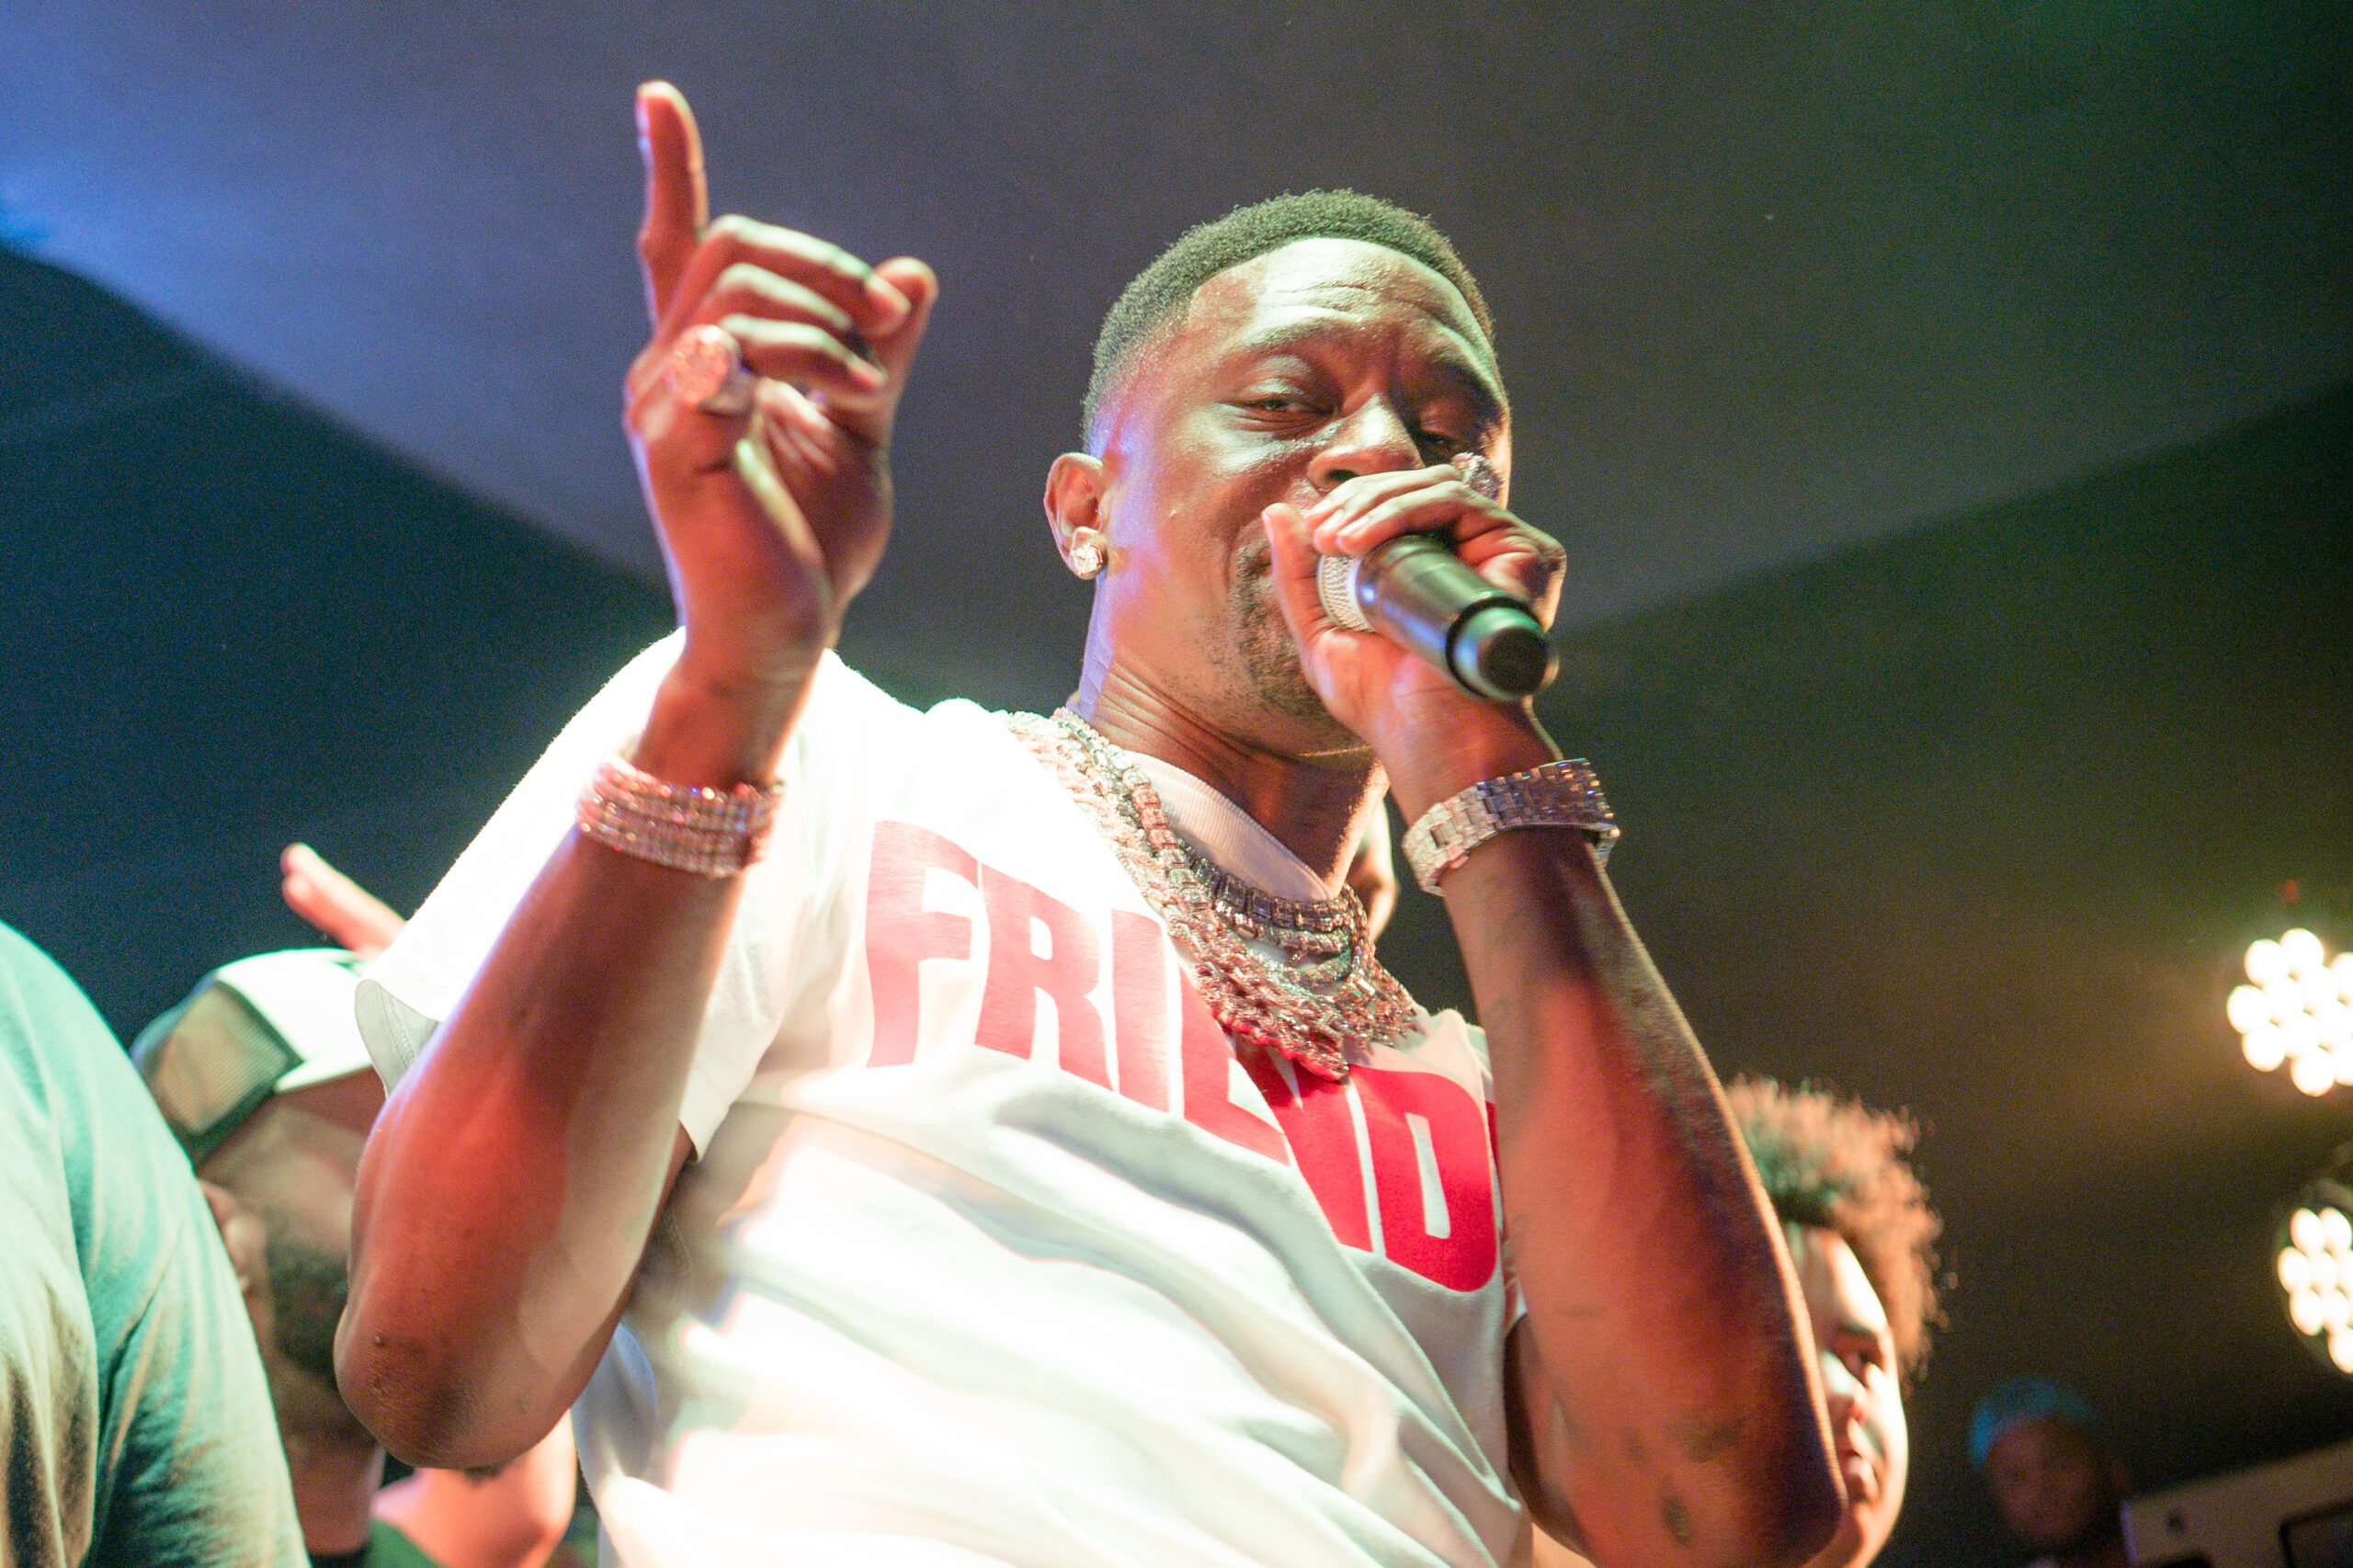 Boosie Badazz Gives 6ix9ine Props For How He Took His Beating